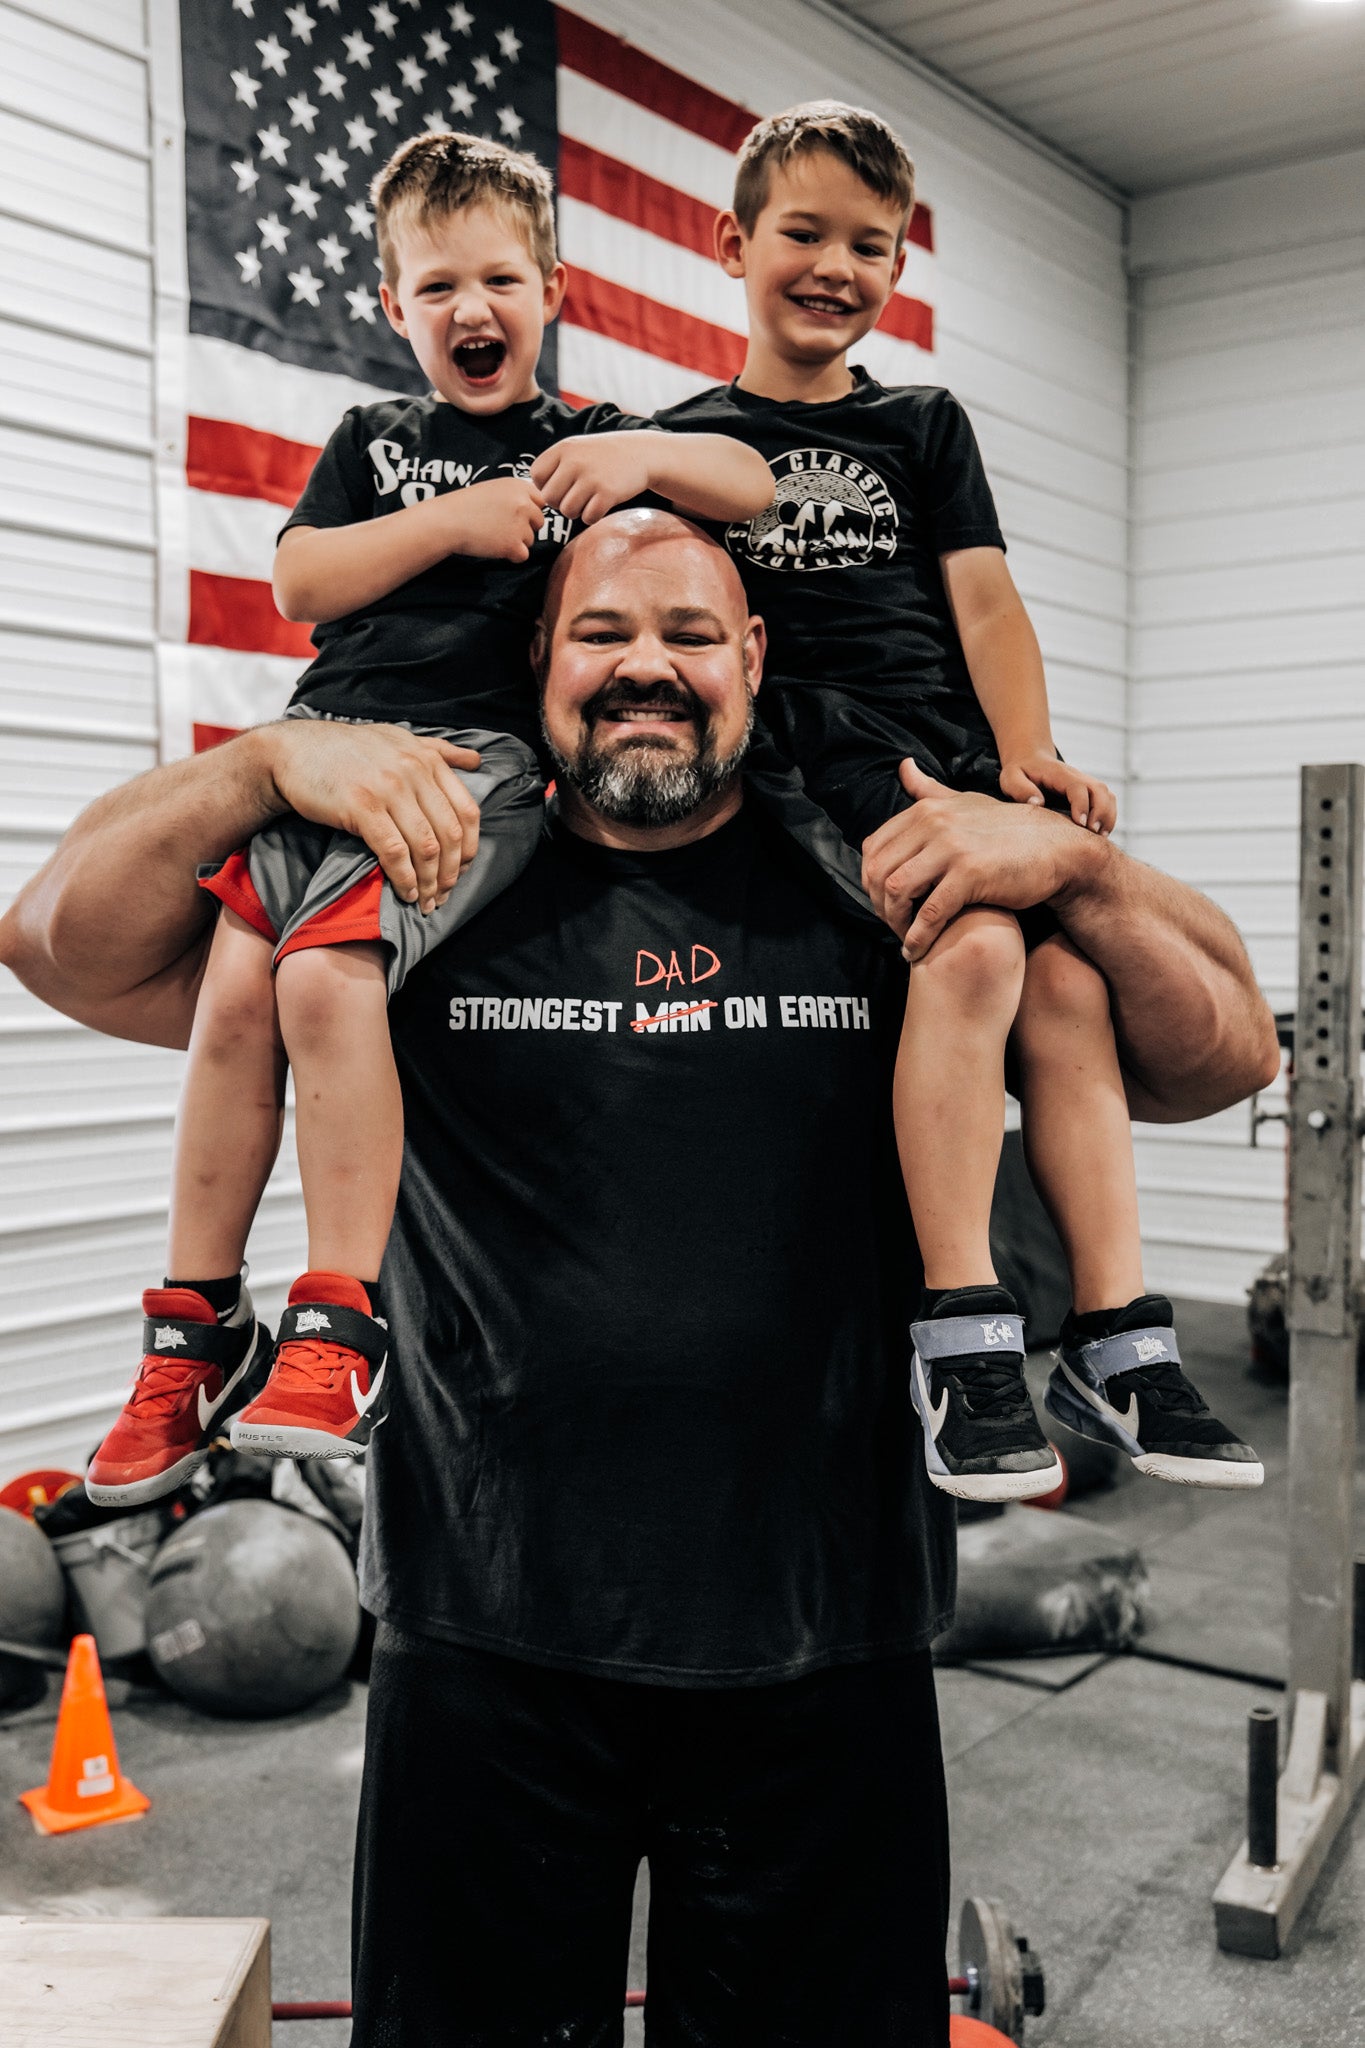 STRONGEST DAD ON EARTH